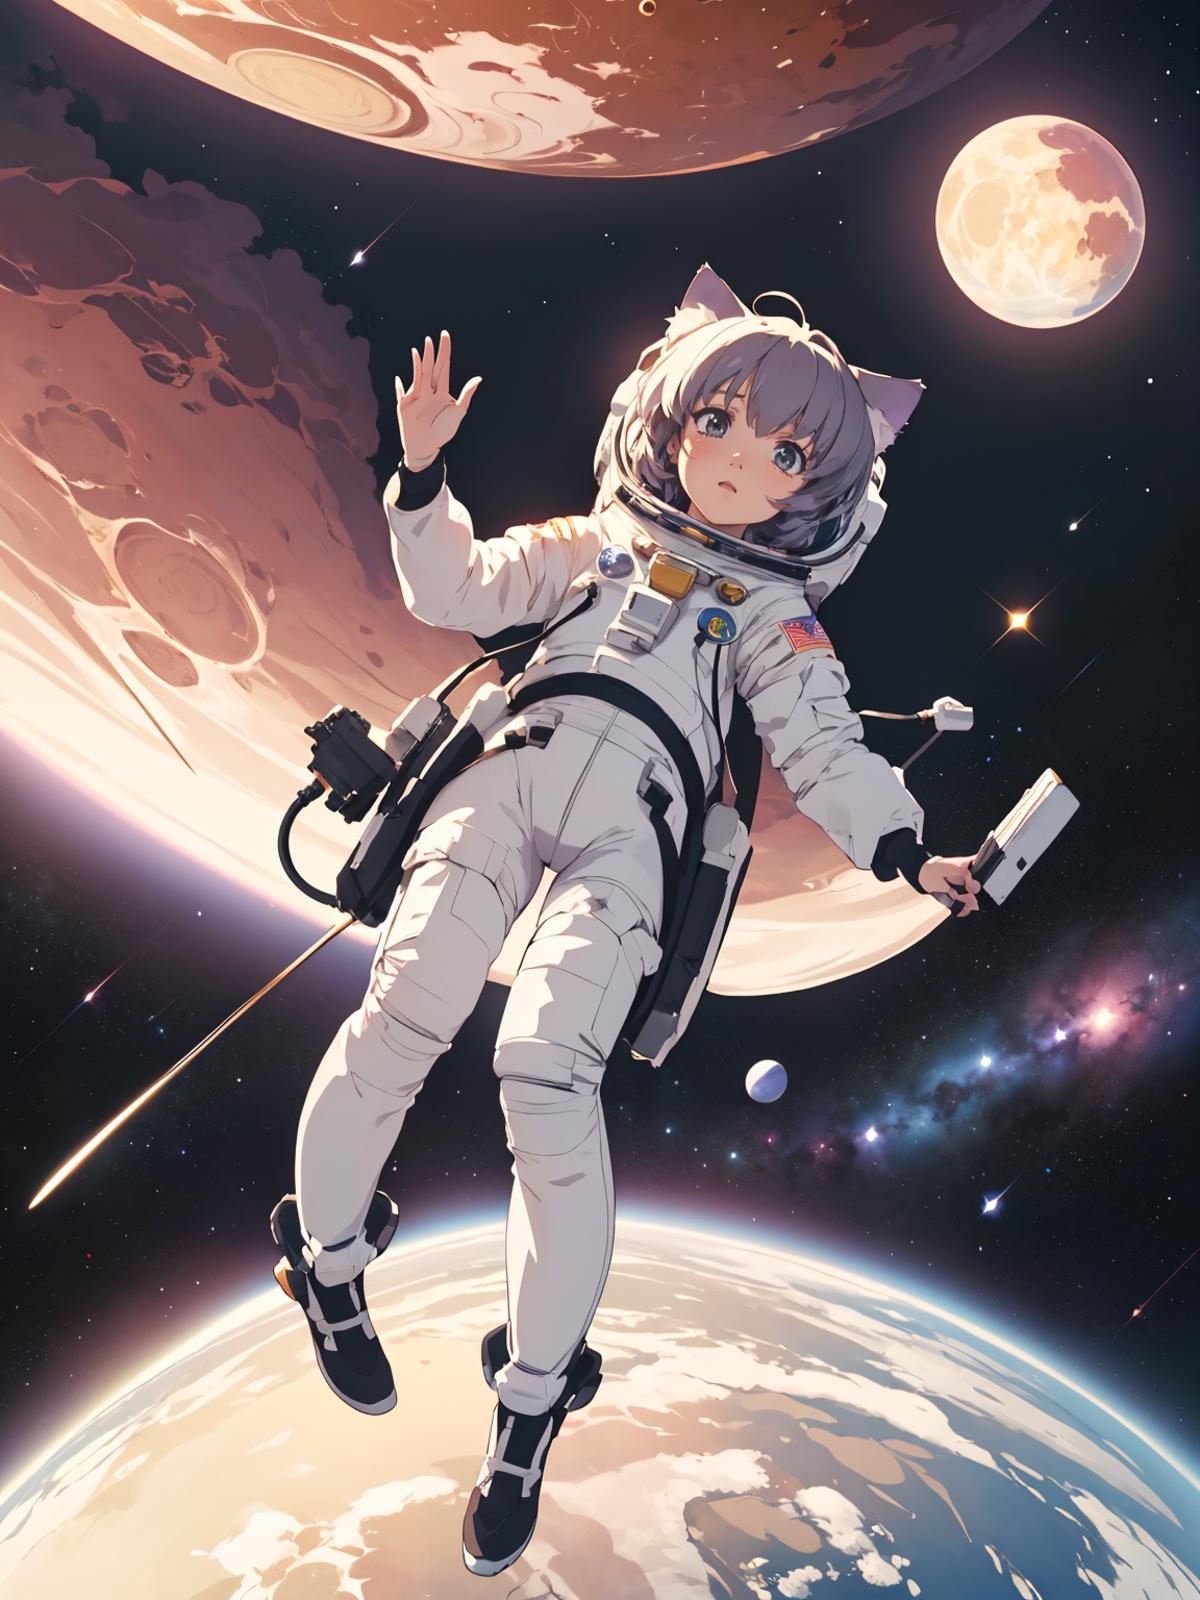 A cartoon illustration of a female astronaut in a white spacesuit floating in space.